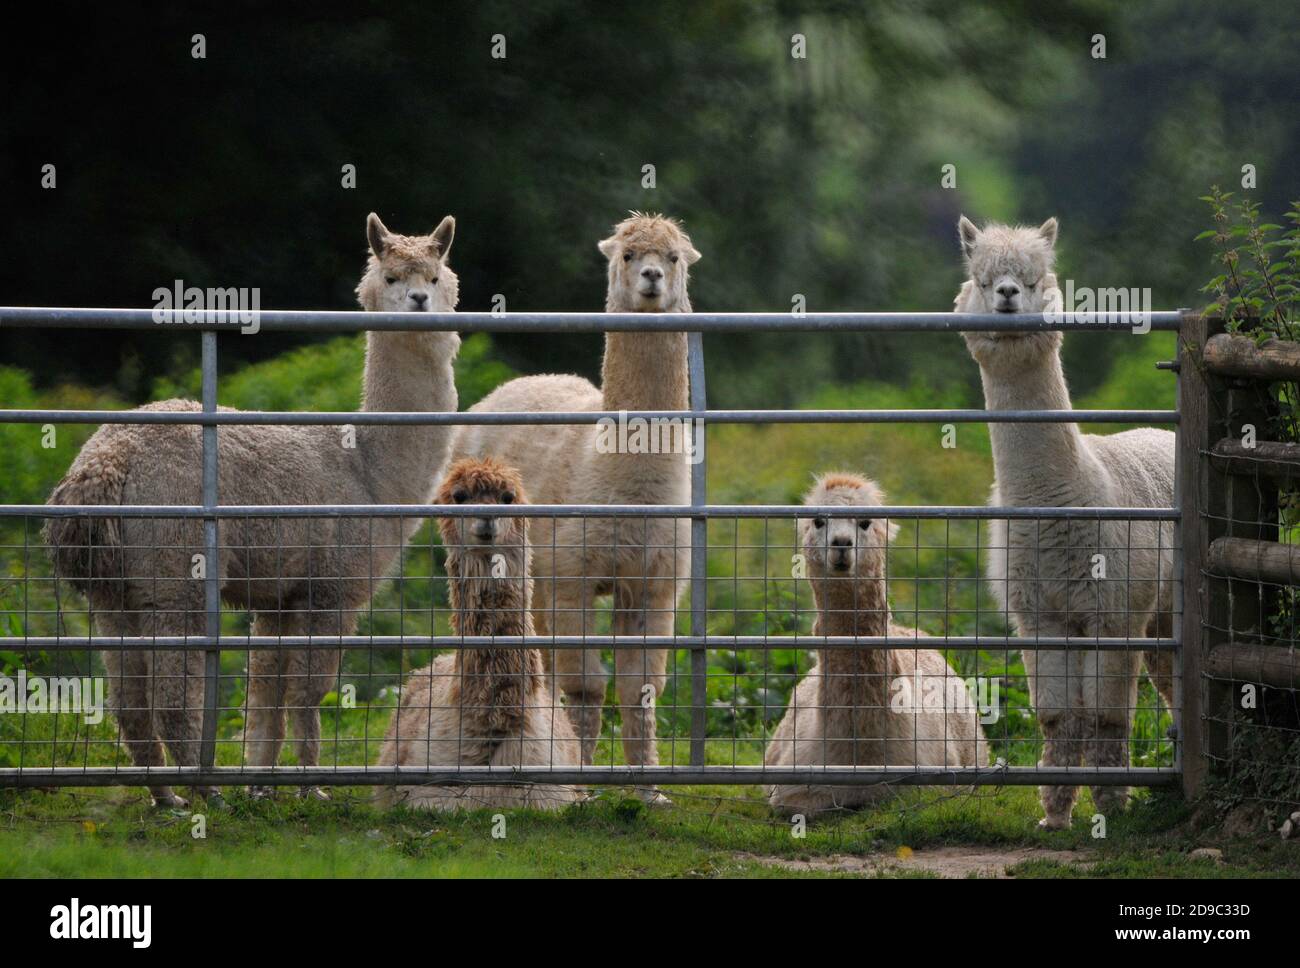 Alpacas (Vicugna pacos) - a species of South American camel being farmed for their wool at a farm in Nteherbury, Dorset, England, UK. Stock Photo